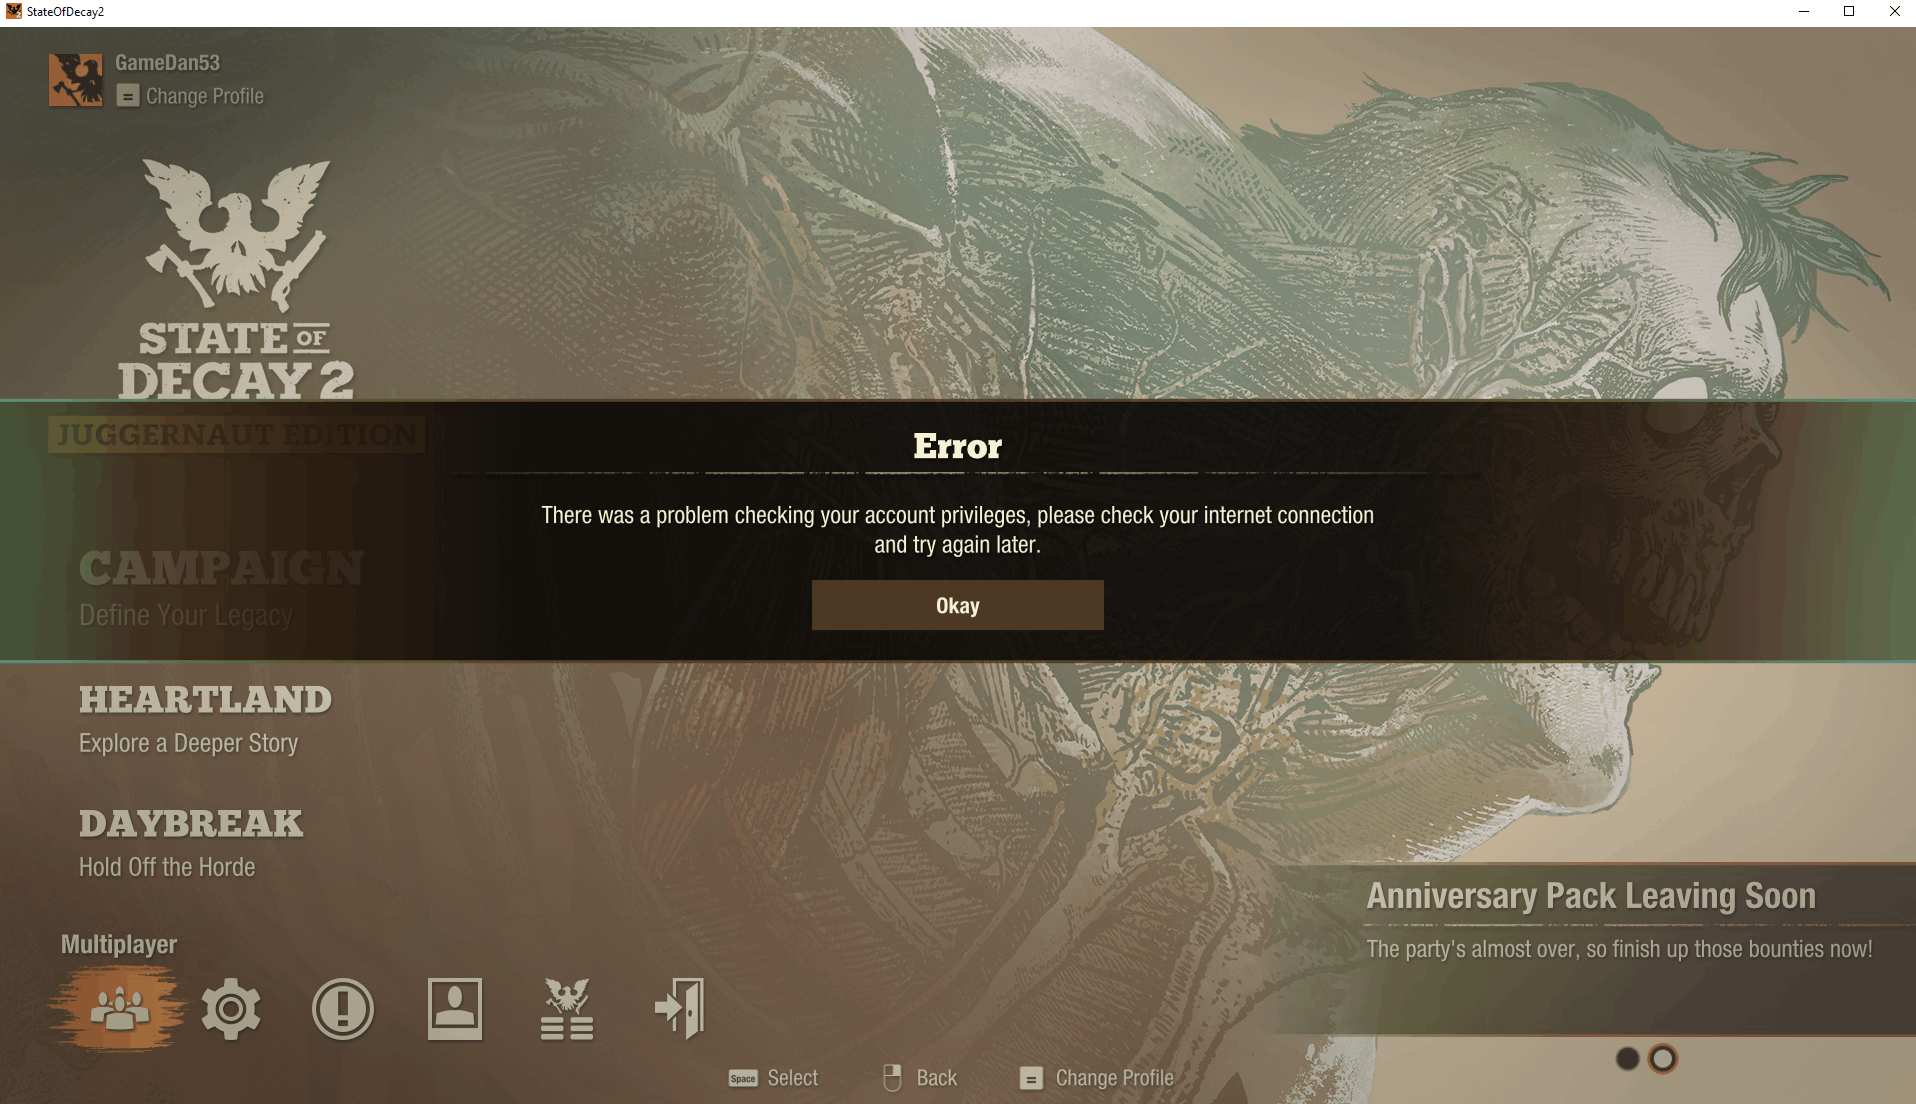 I'm Getting an Error When Trying to Play Multiplayer with a Child Account